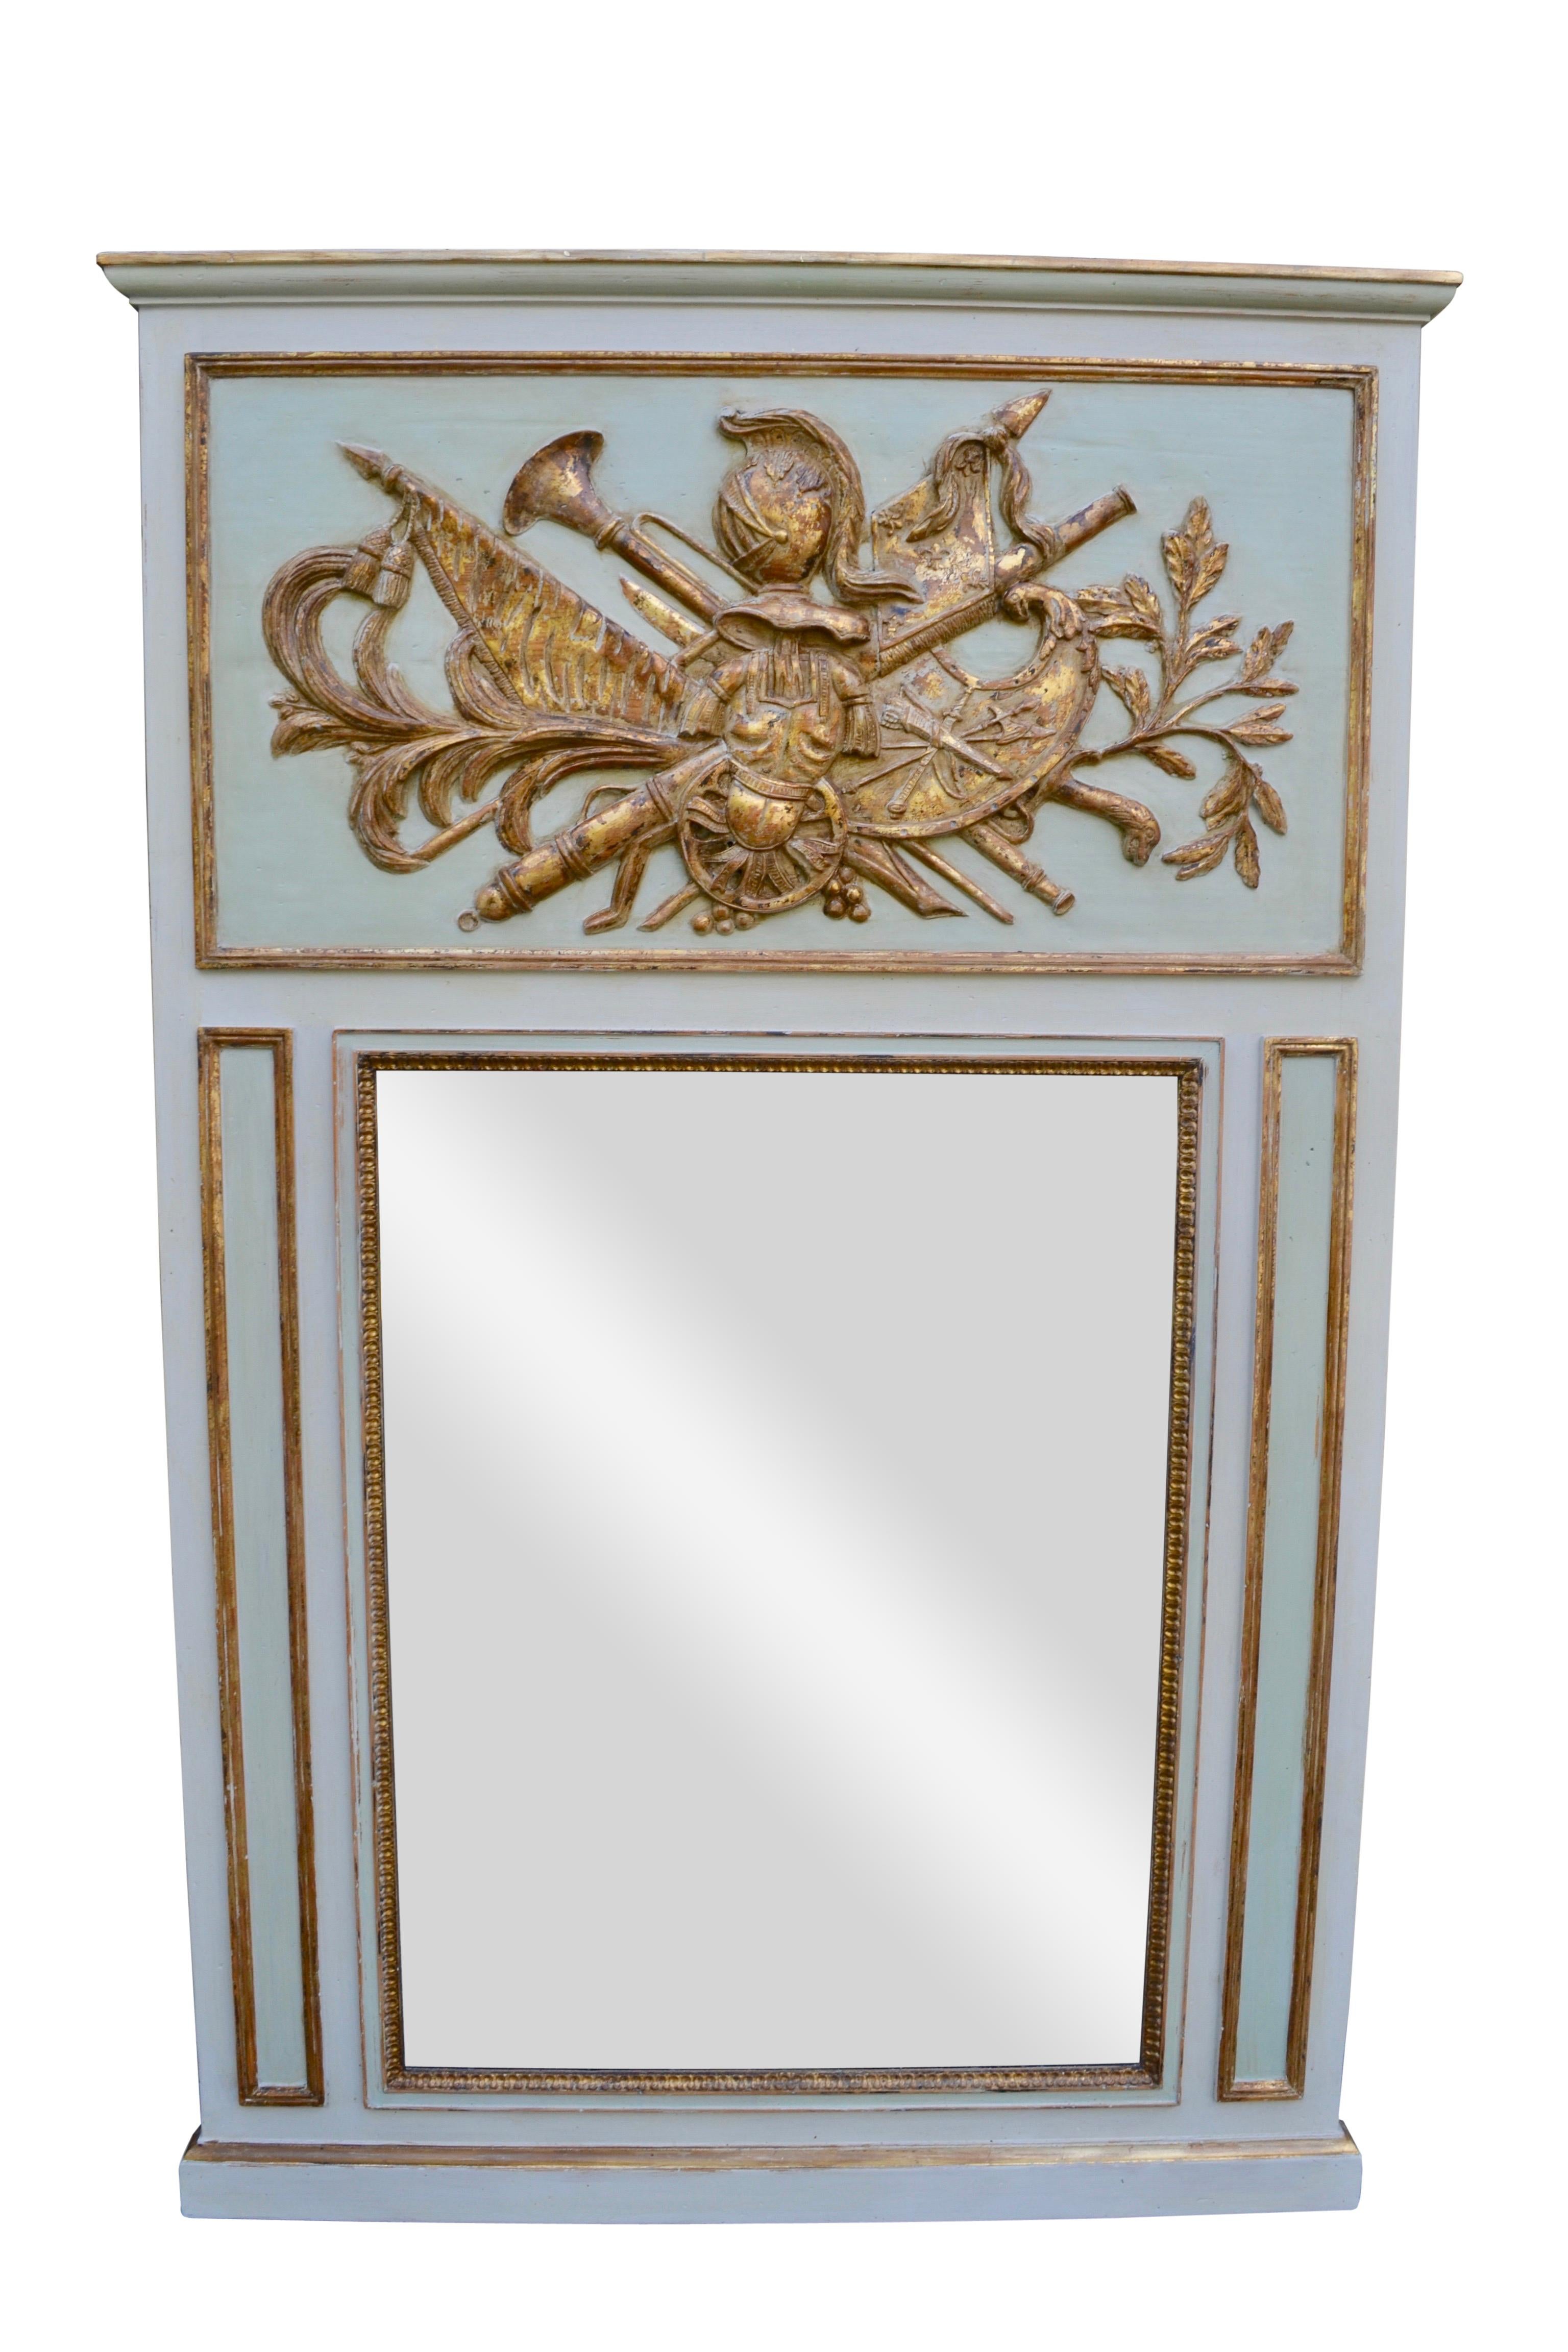 A 20thC copy of a French Louis XVI demi-lune console and over mirror. Both pieces are painted in a two toned light blue/grey with gilded highlights to the decorative elements on both pieces, ie. gilded filets, rosettes, framing, and especially the